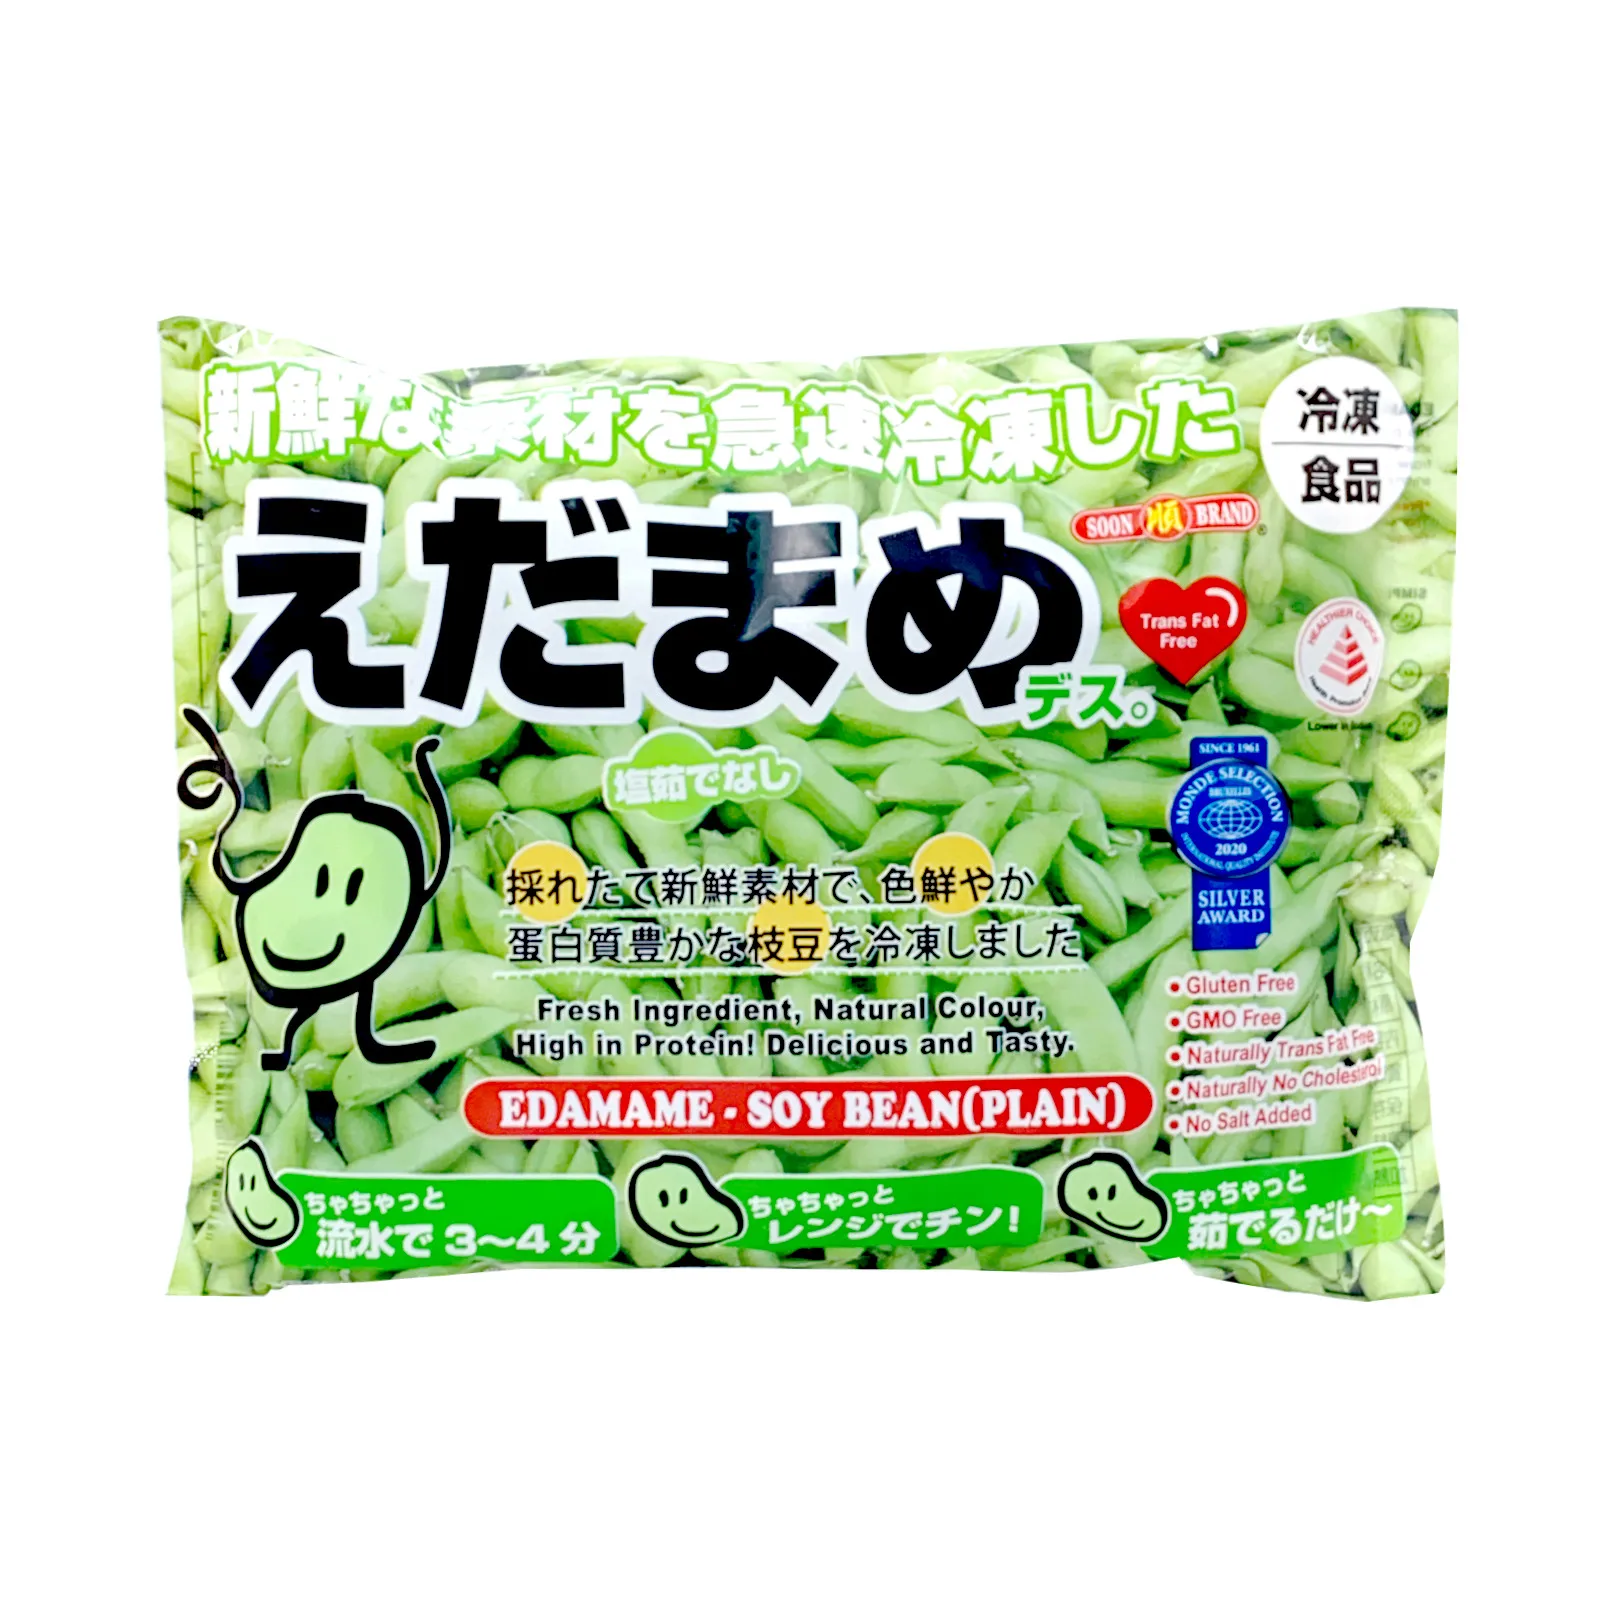 Fresh Ingredients Natural Color Highest Protein Delicious Tasty Frozen Soon Brand Edamame SoyBean (Plain) (10000003965438)